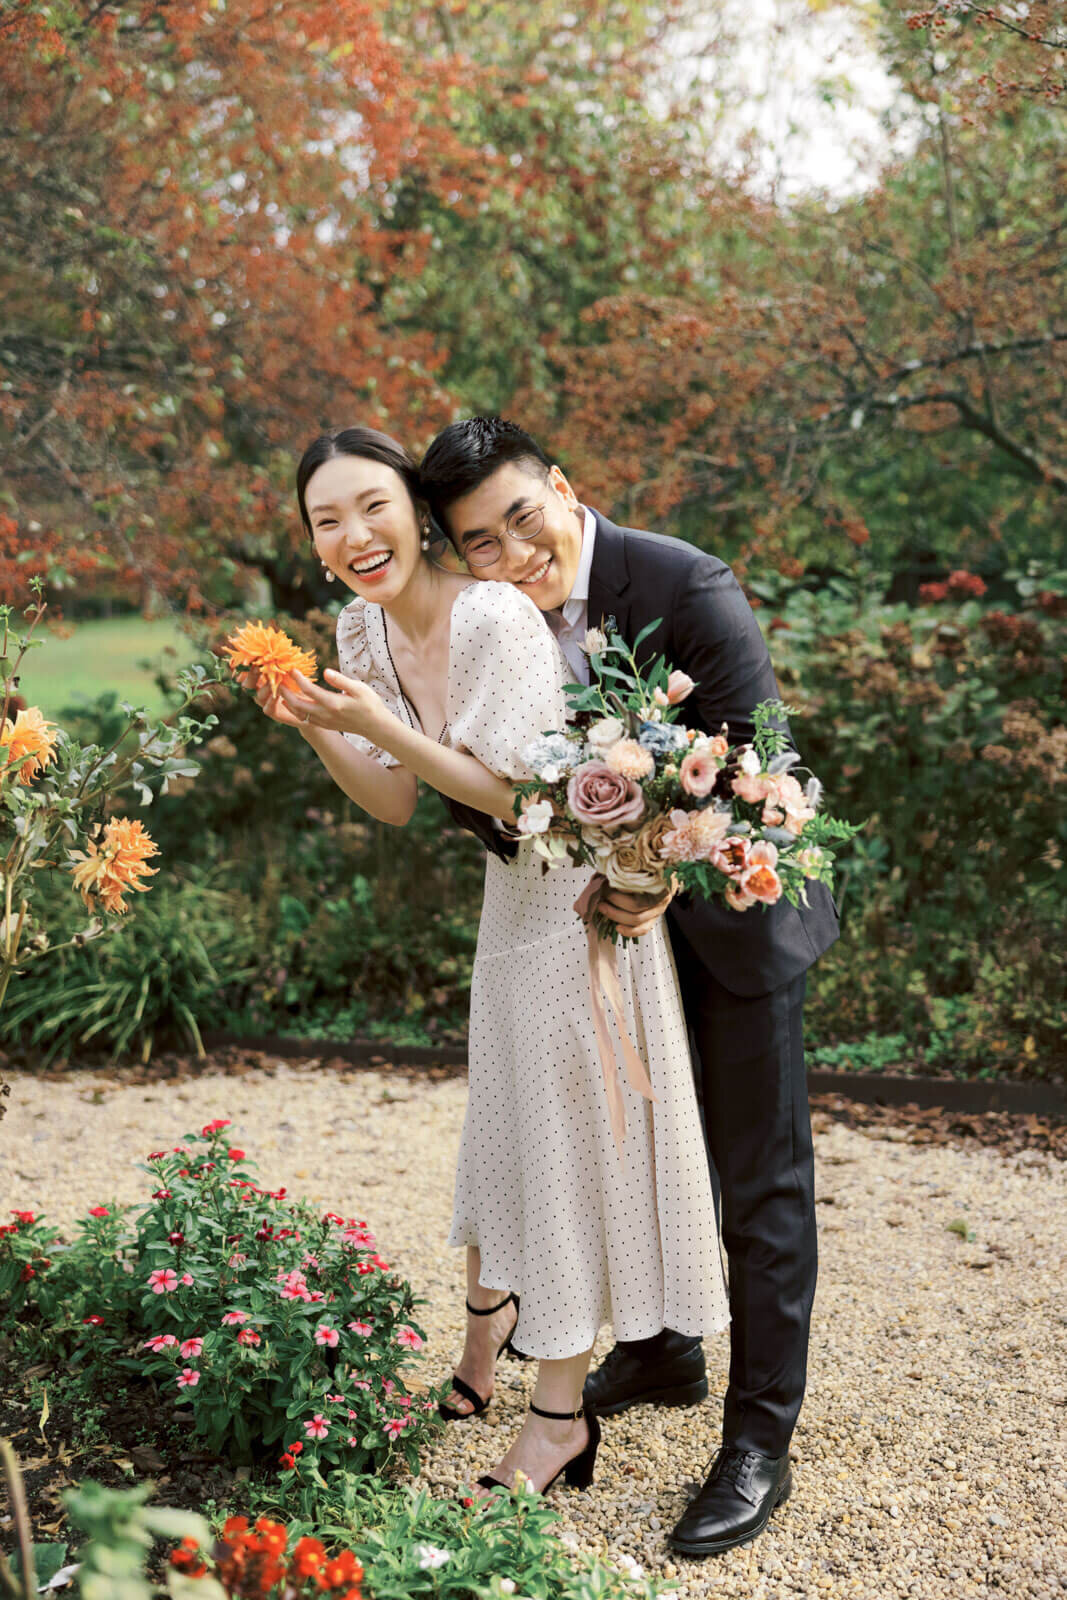 The man is hugging his fiance from behind amidst the flower-filled garden at Planting Fields Arboretum, NY. Image by Jenny Fu Studio